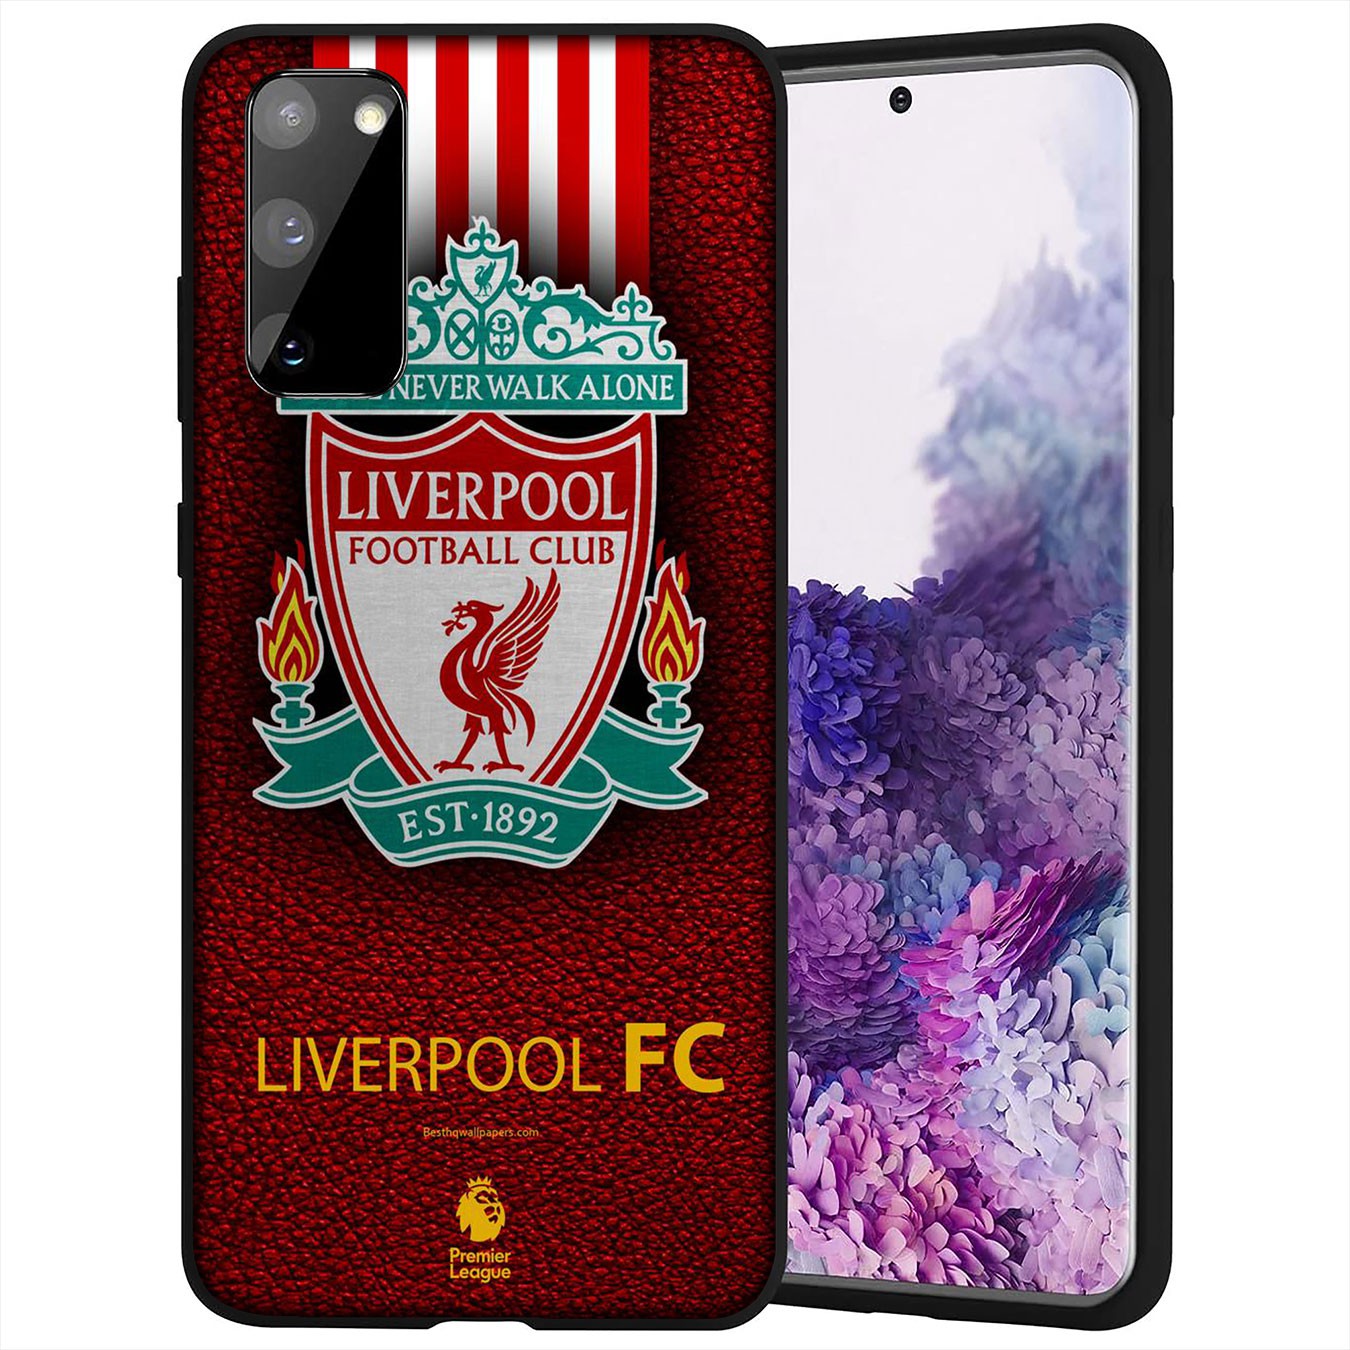 Samsung Galaxy S21 Ultra S8 Plus F62 M62 A2 A32 A52 A72 S21+ S8+ S21Plus Casing Soft Silicone Liverpool red Logo Phone Case